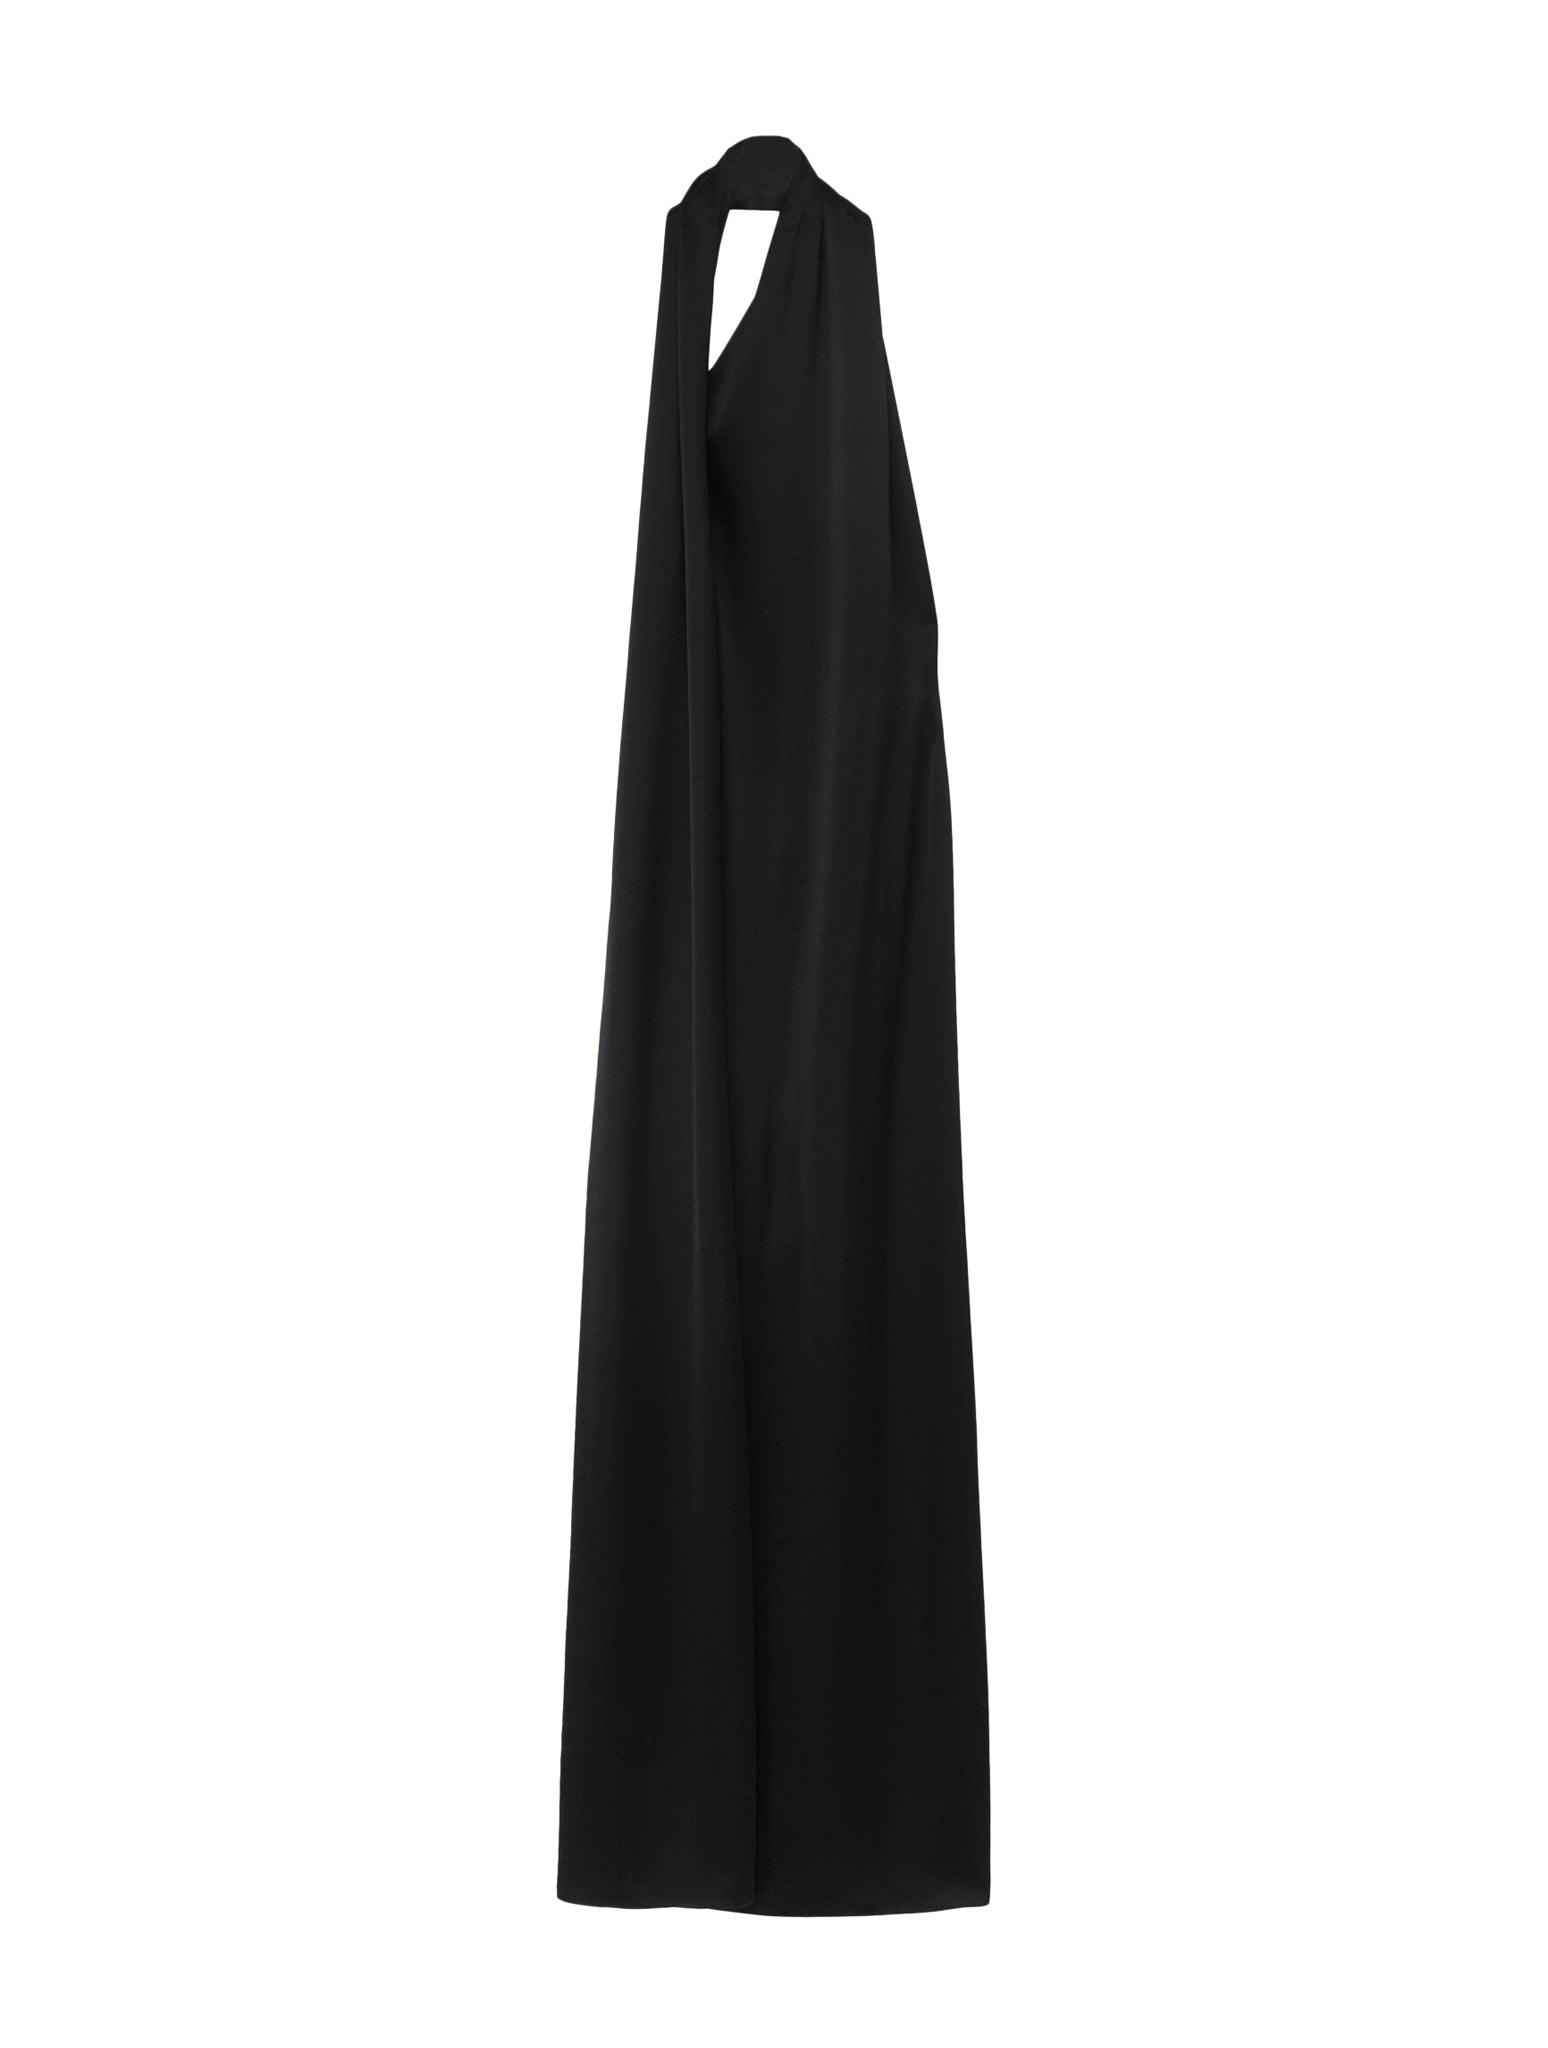 Scarf dress in technical satin